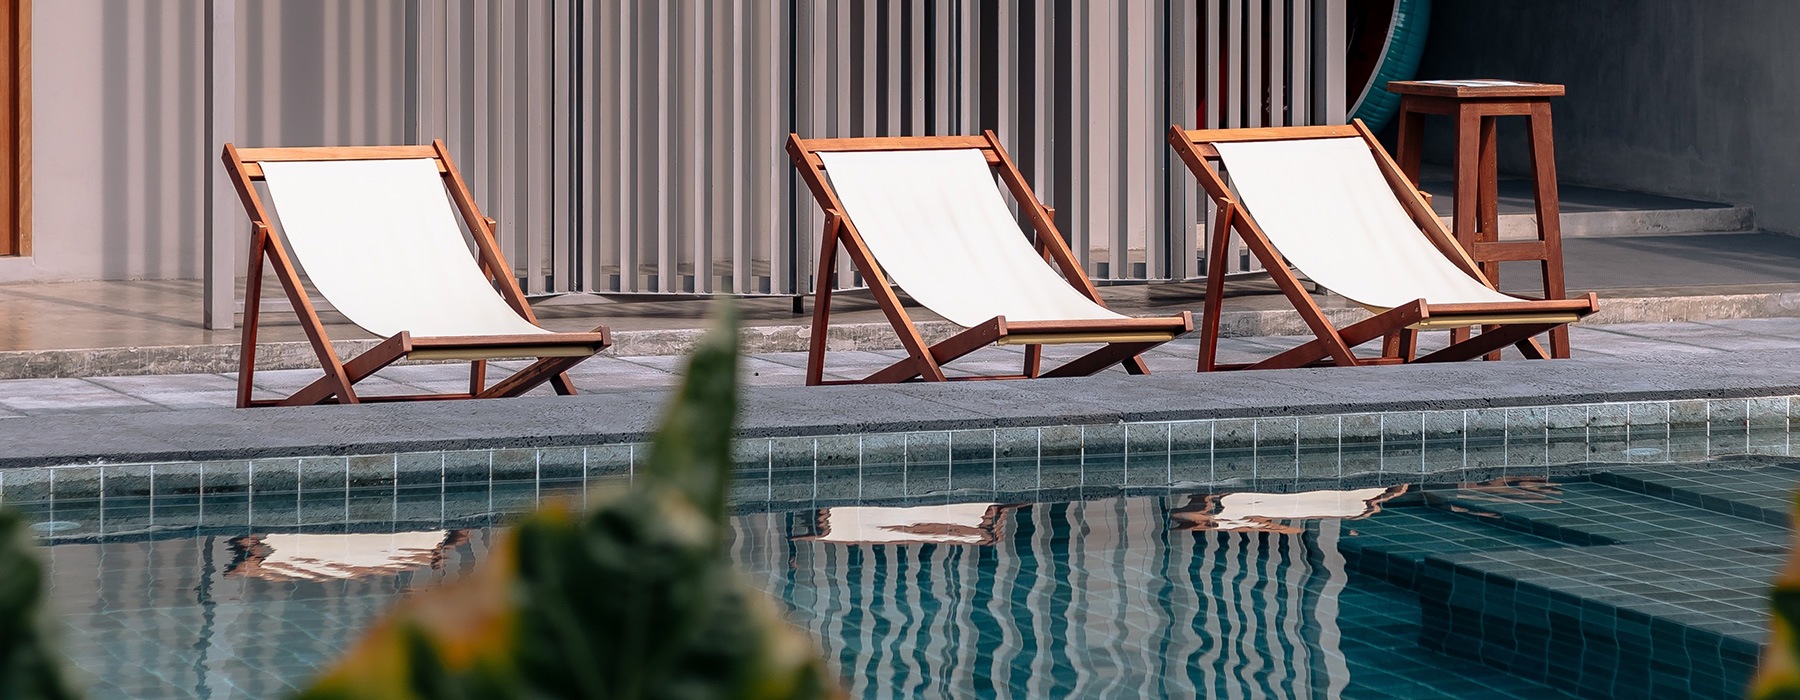 lifestyle image of rows of chairs by the pool